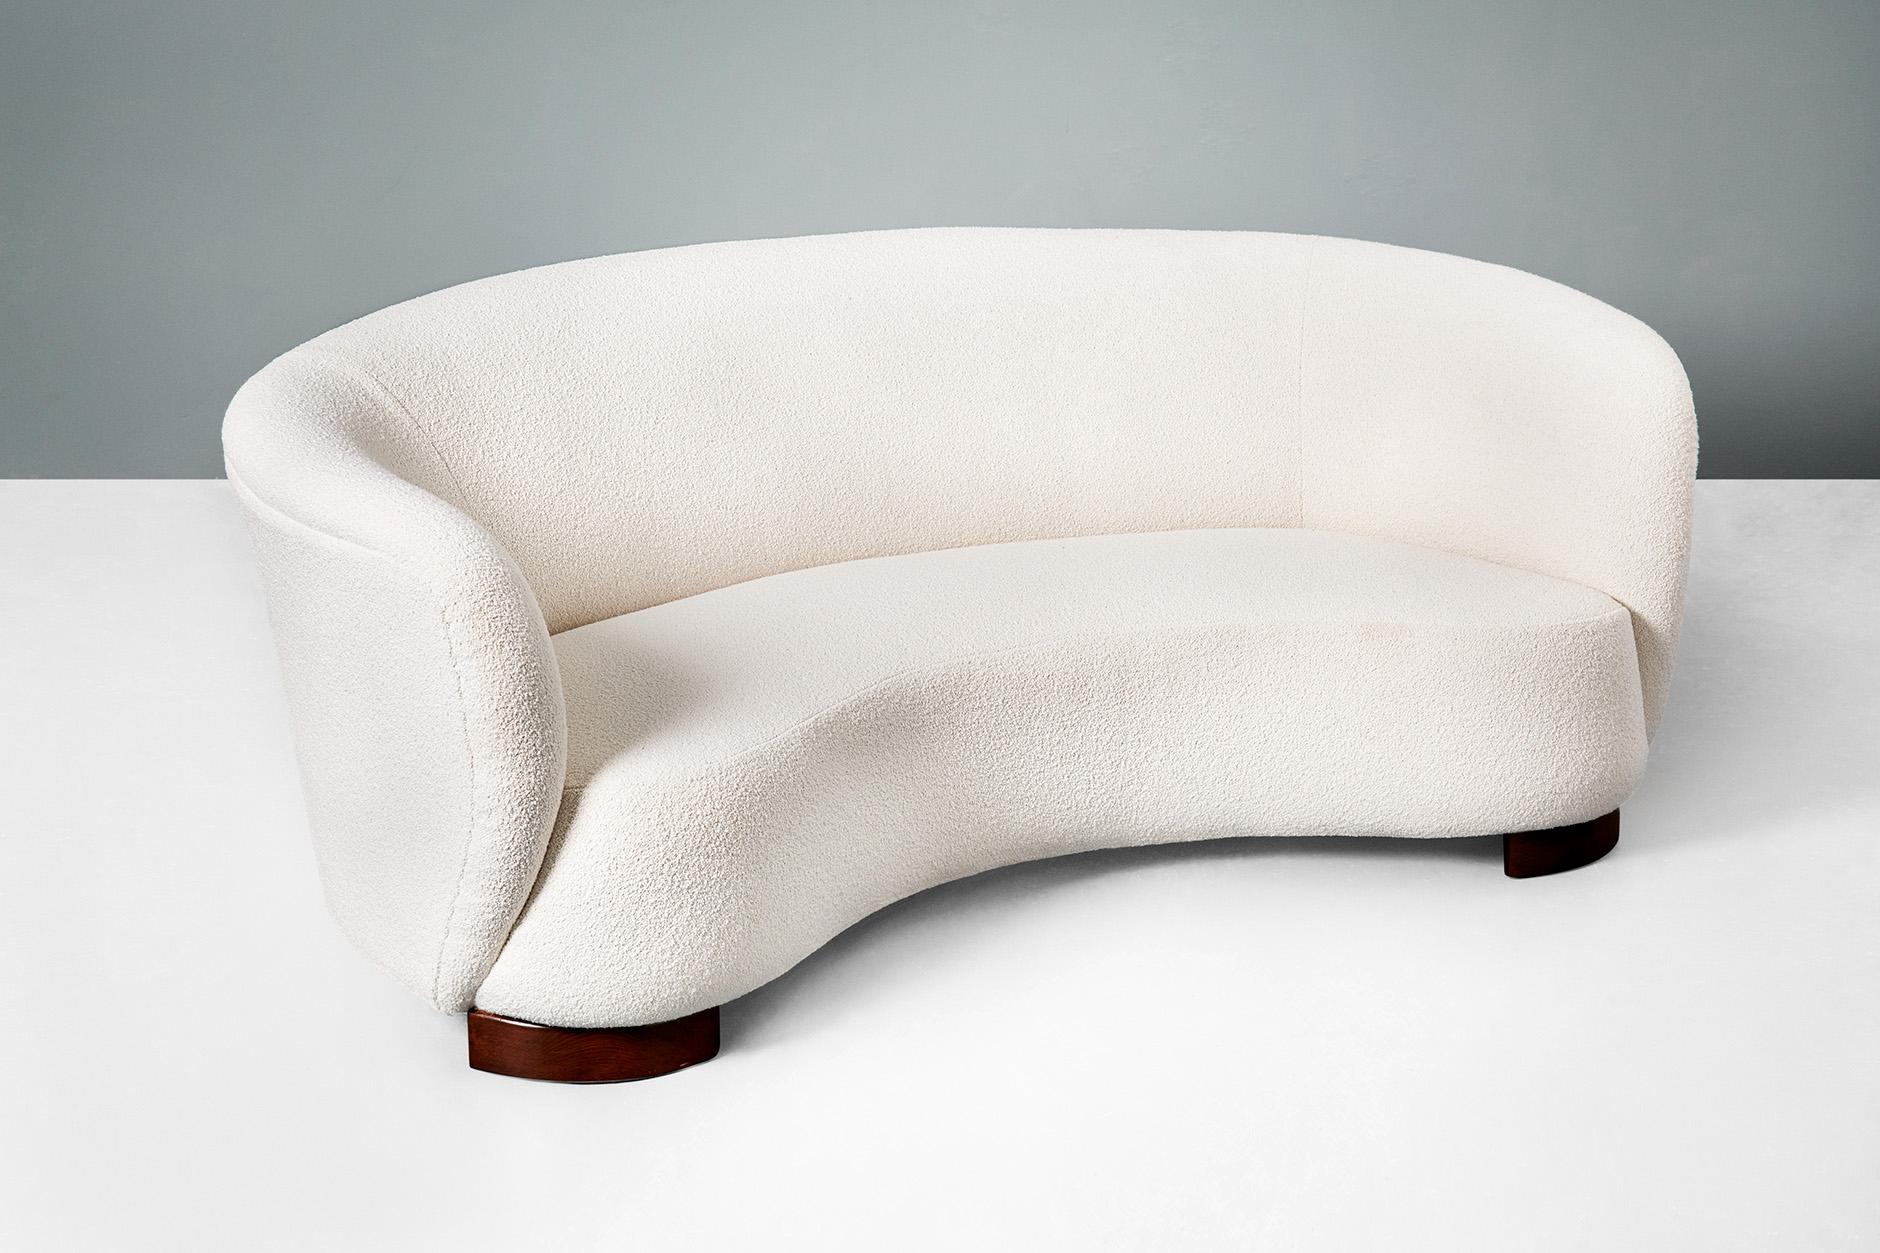 Danish cabinetmaker

Curved sofa, 1940s.

Curved sofa produced in Denmark in the 1940s. The sofa has thick, stained beechwood legs and has been reupholstered in cotton-wool blend bouclé fabric from Chase Erwin in the UK. The sofa has been